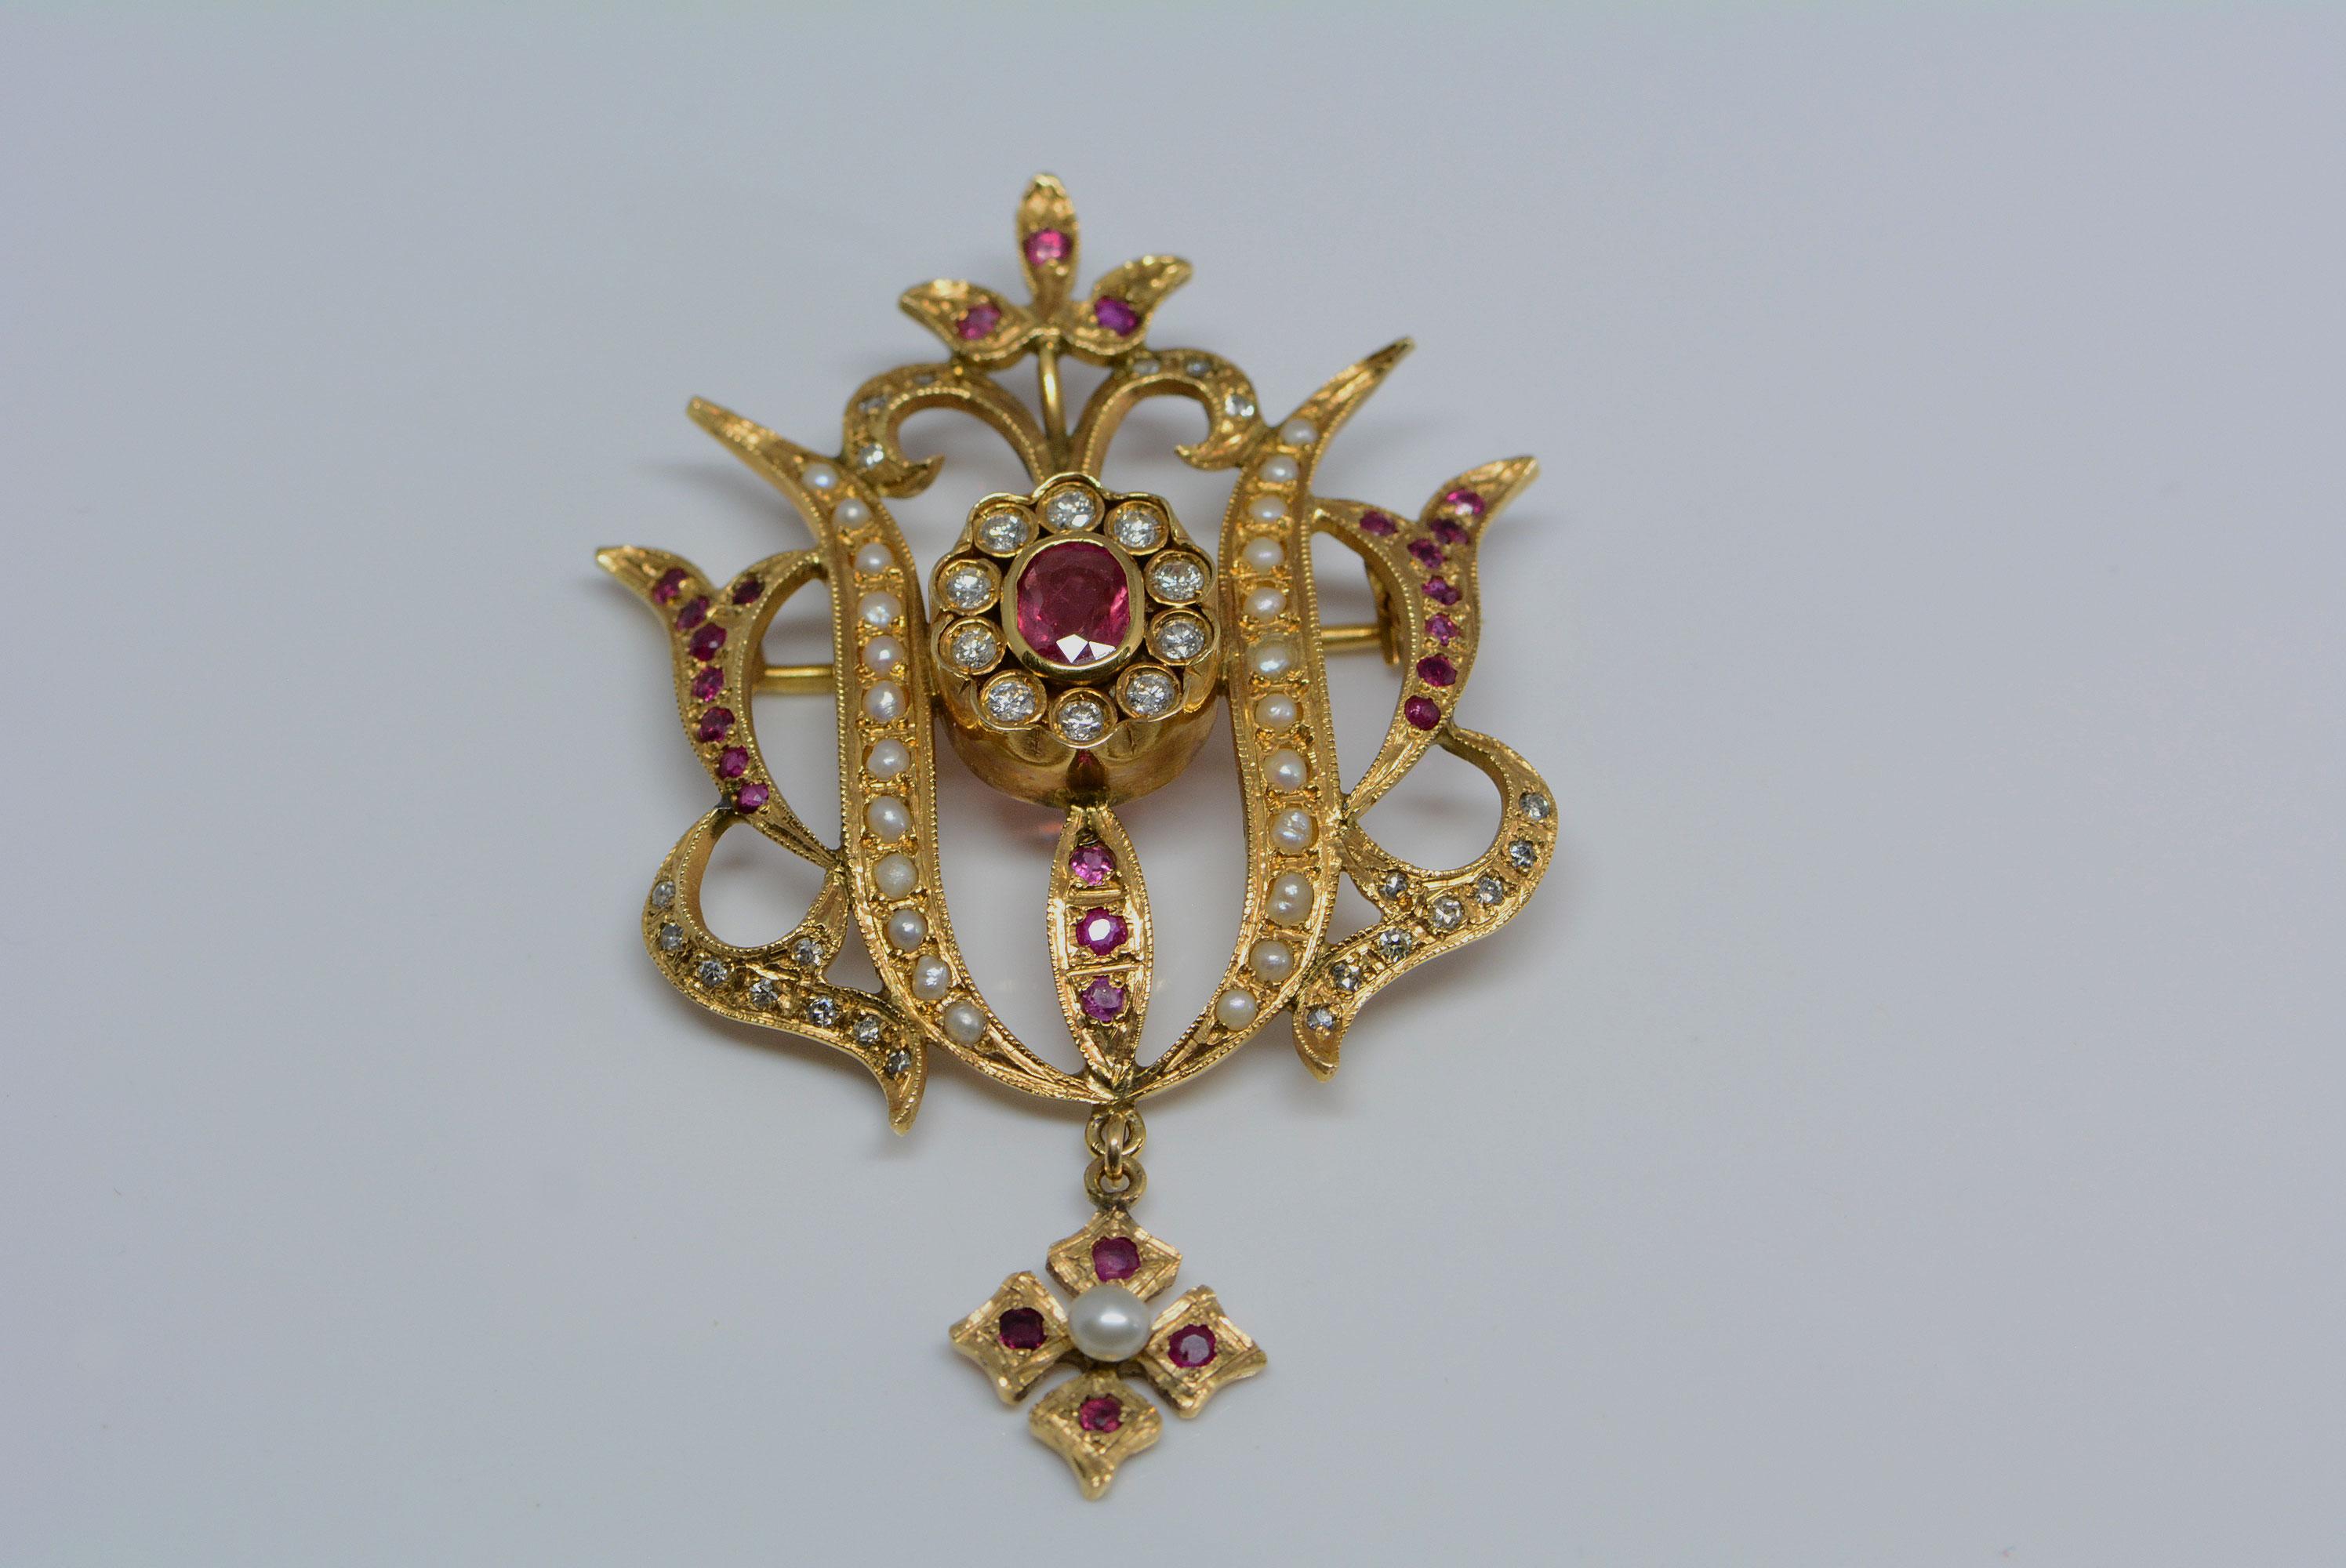 This brooch reminds us of something you would see out of the tudor time period with the combination of pearls, rubies, and diamonds. It really makes a statement and it can also be worn as either a pendant or a brooch. The brooch is made from 14